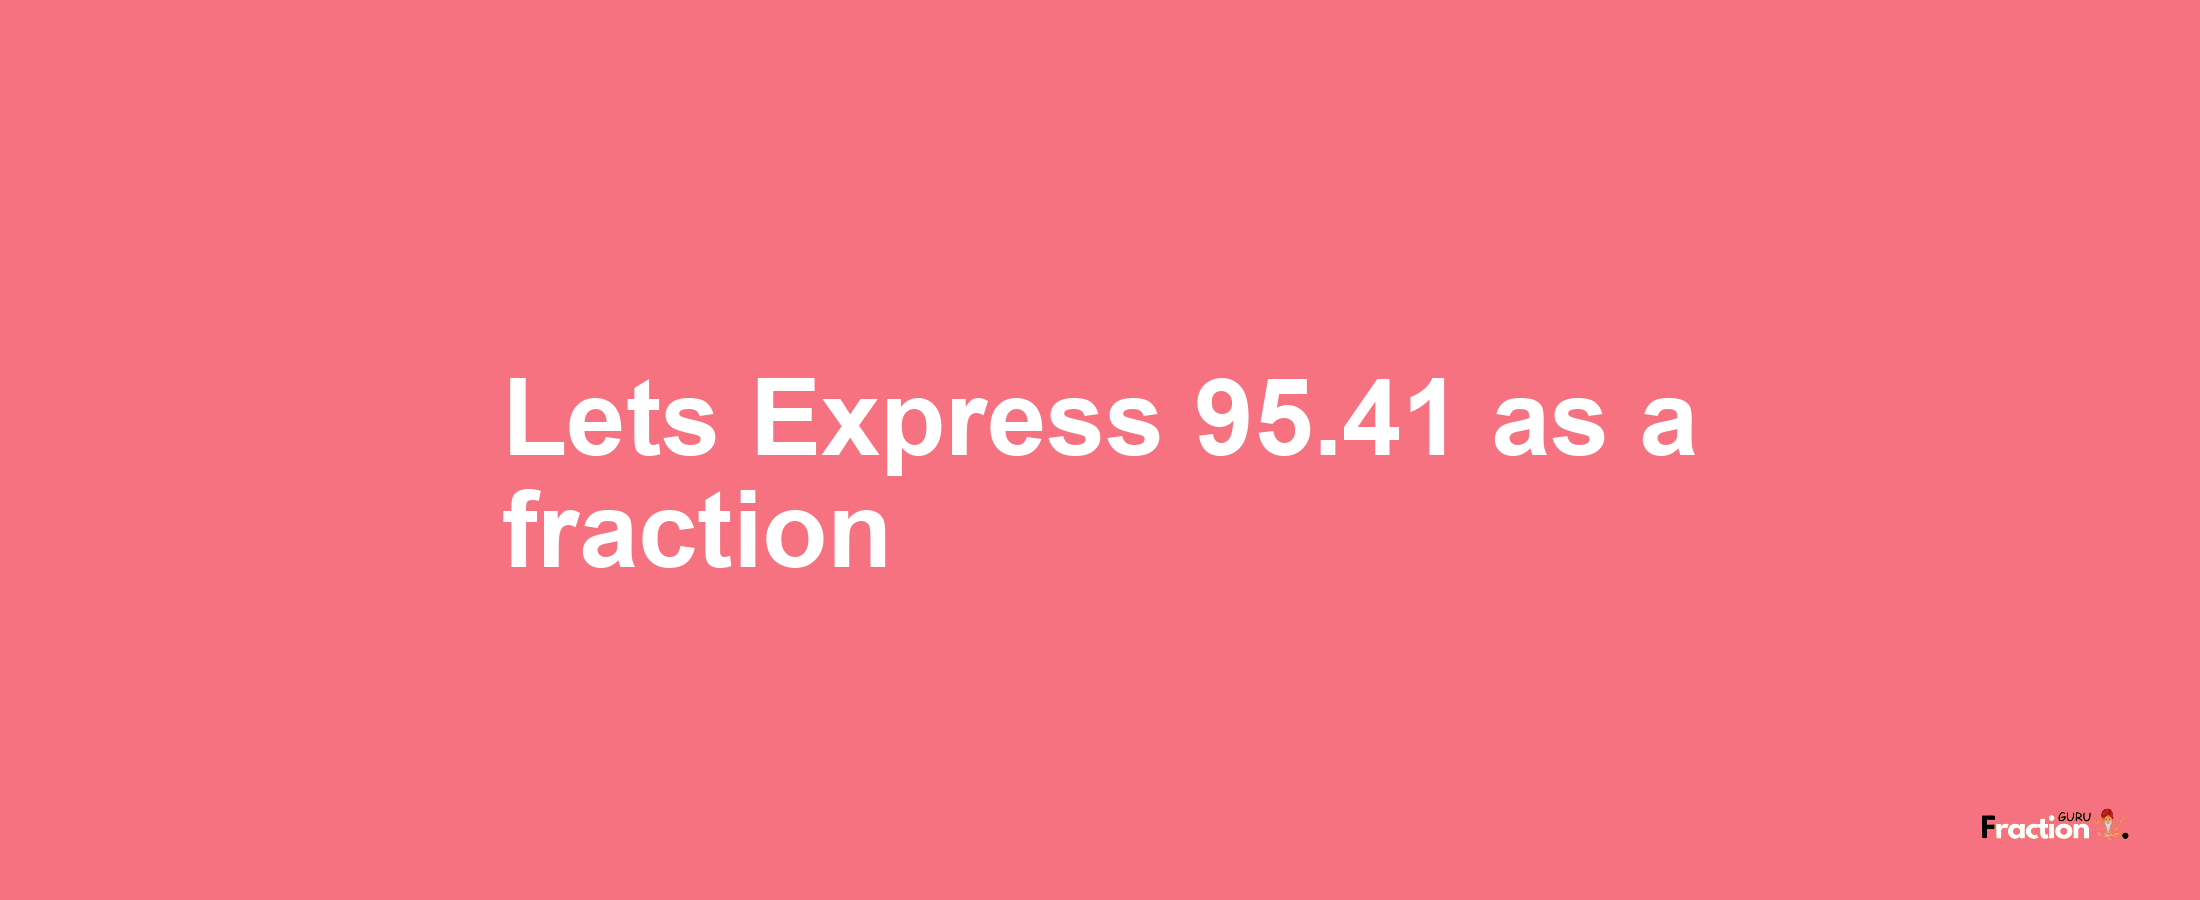 Lets Express 95.41 as afraction